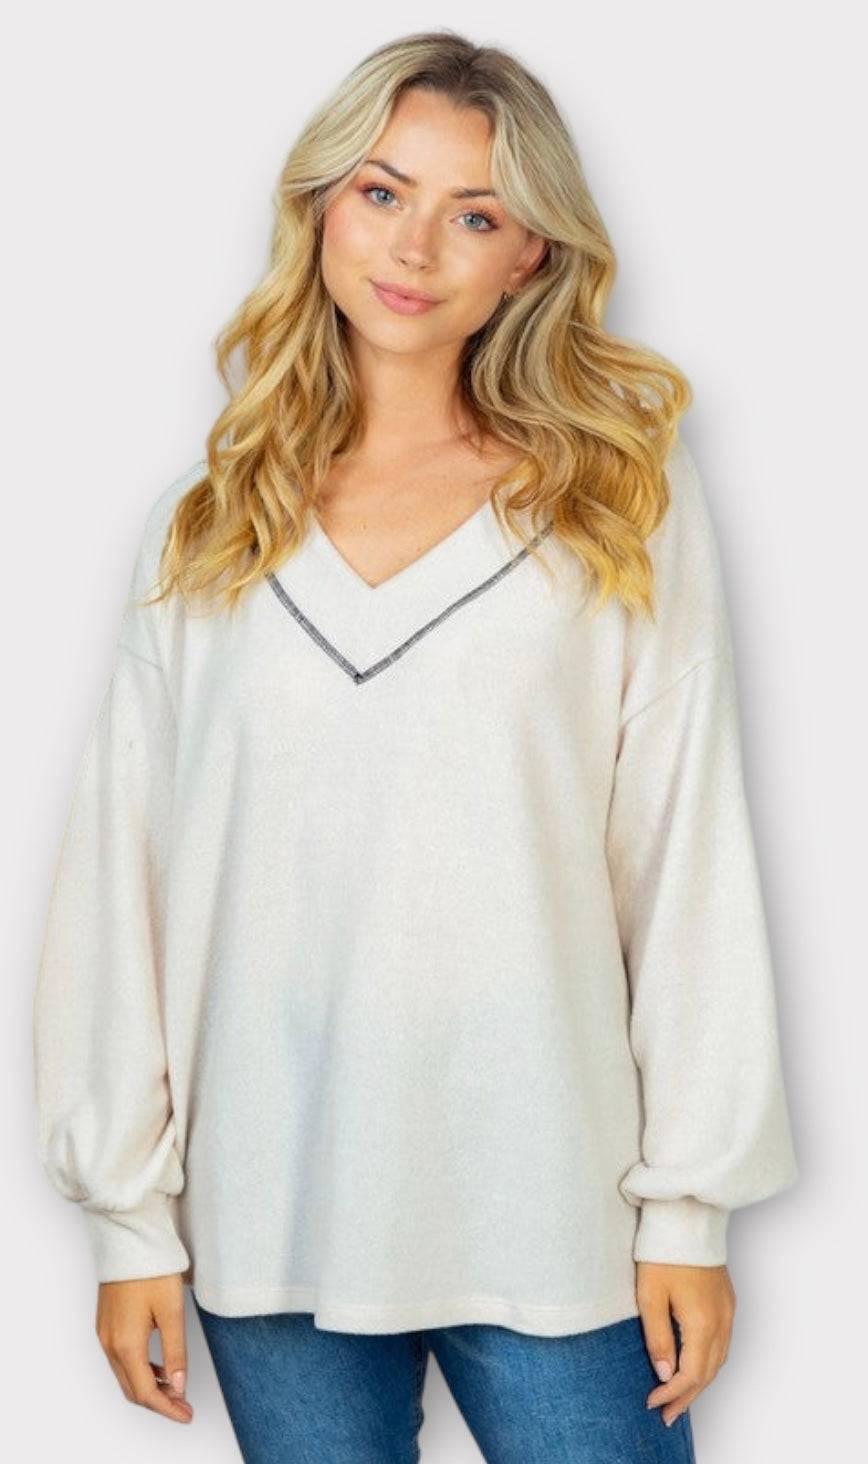 White birch plus size long sleeve knit top in white Shirts & Tops